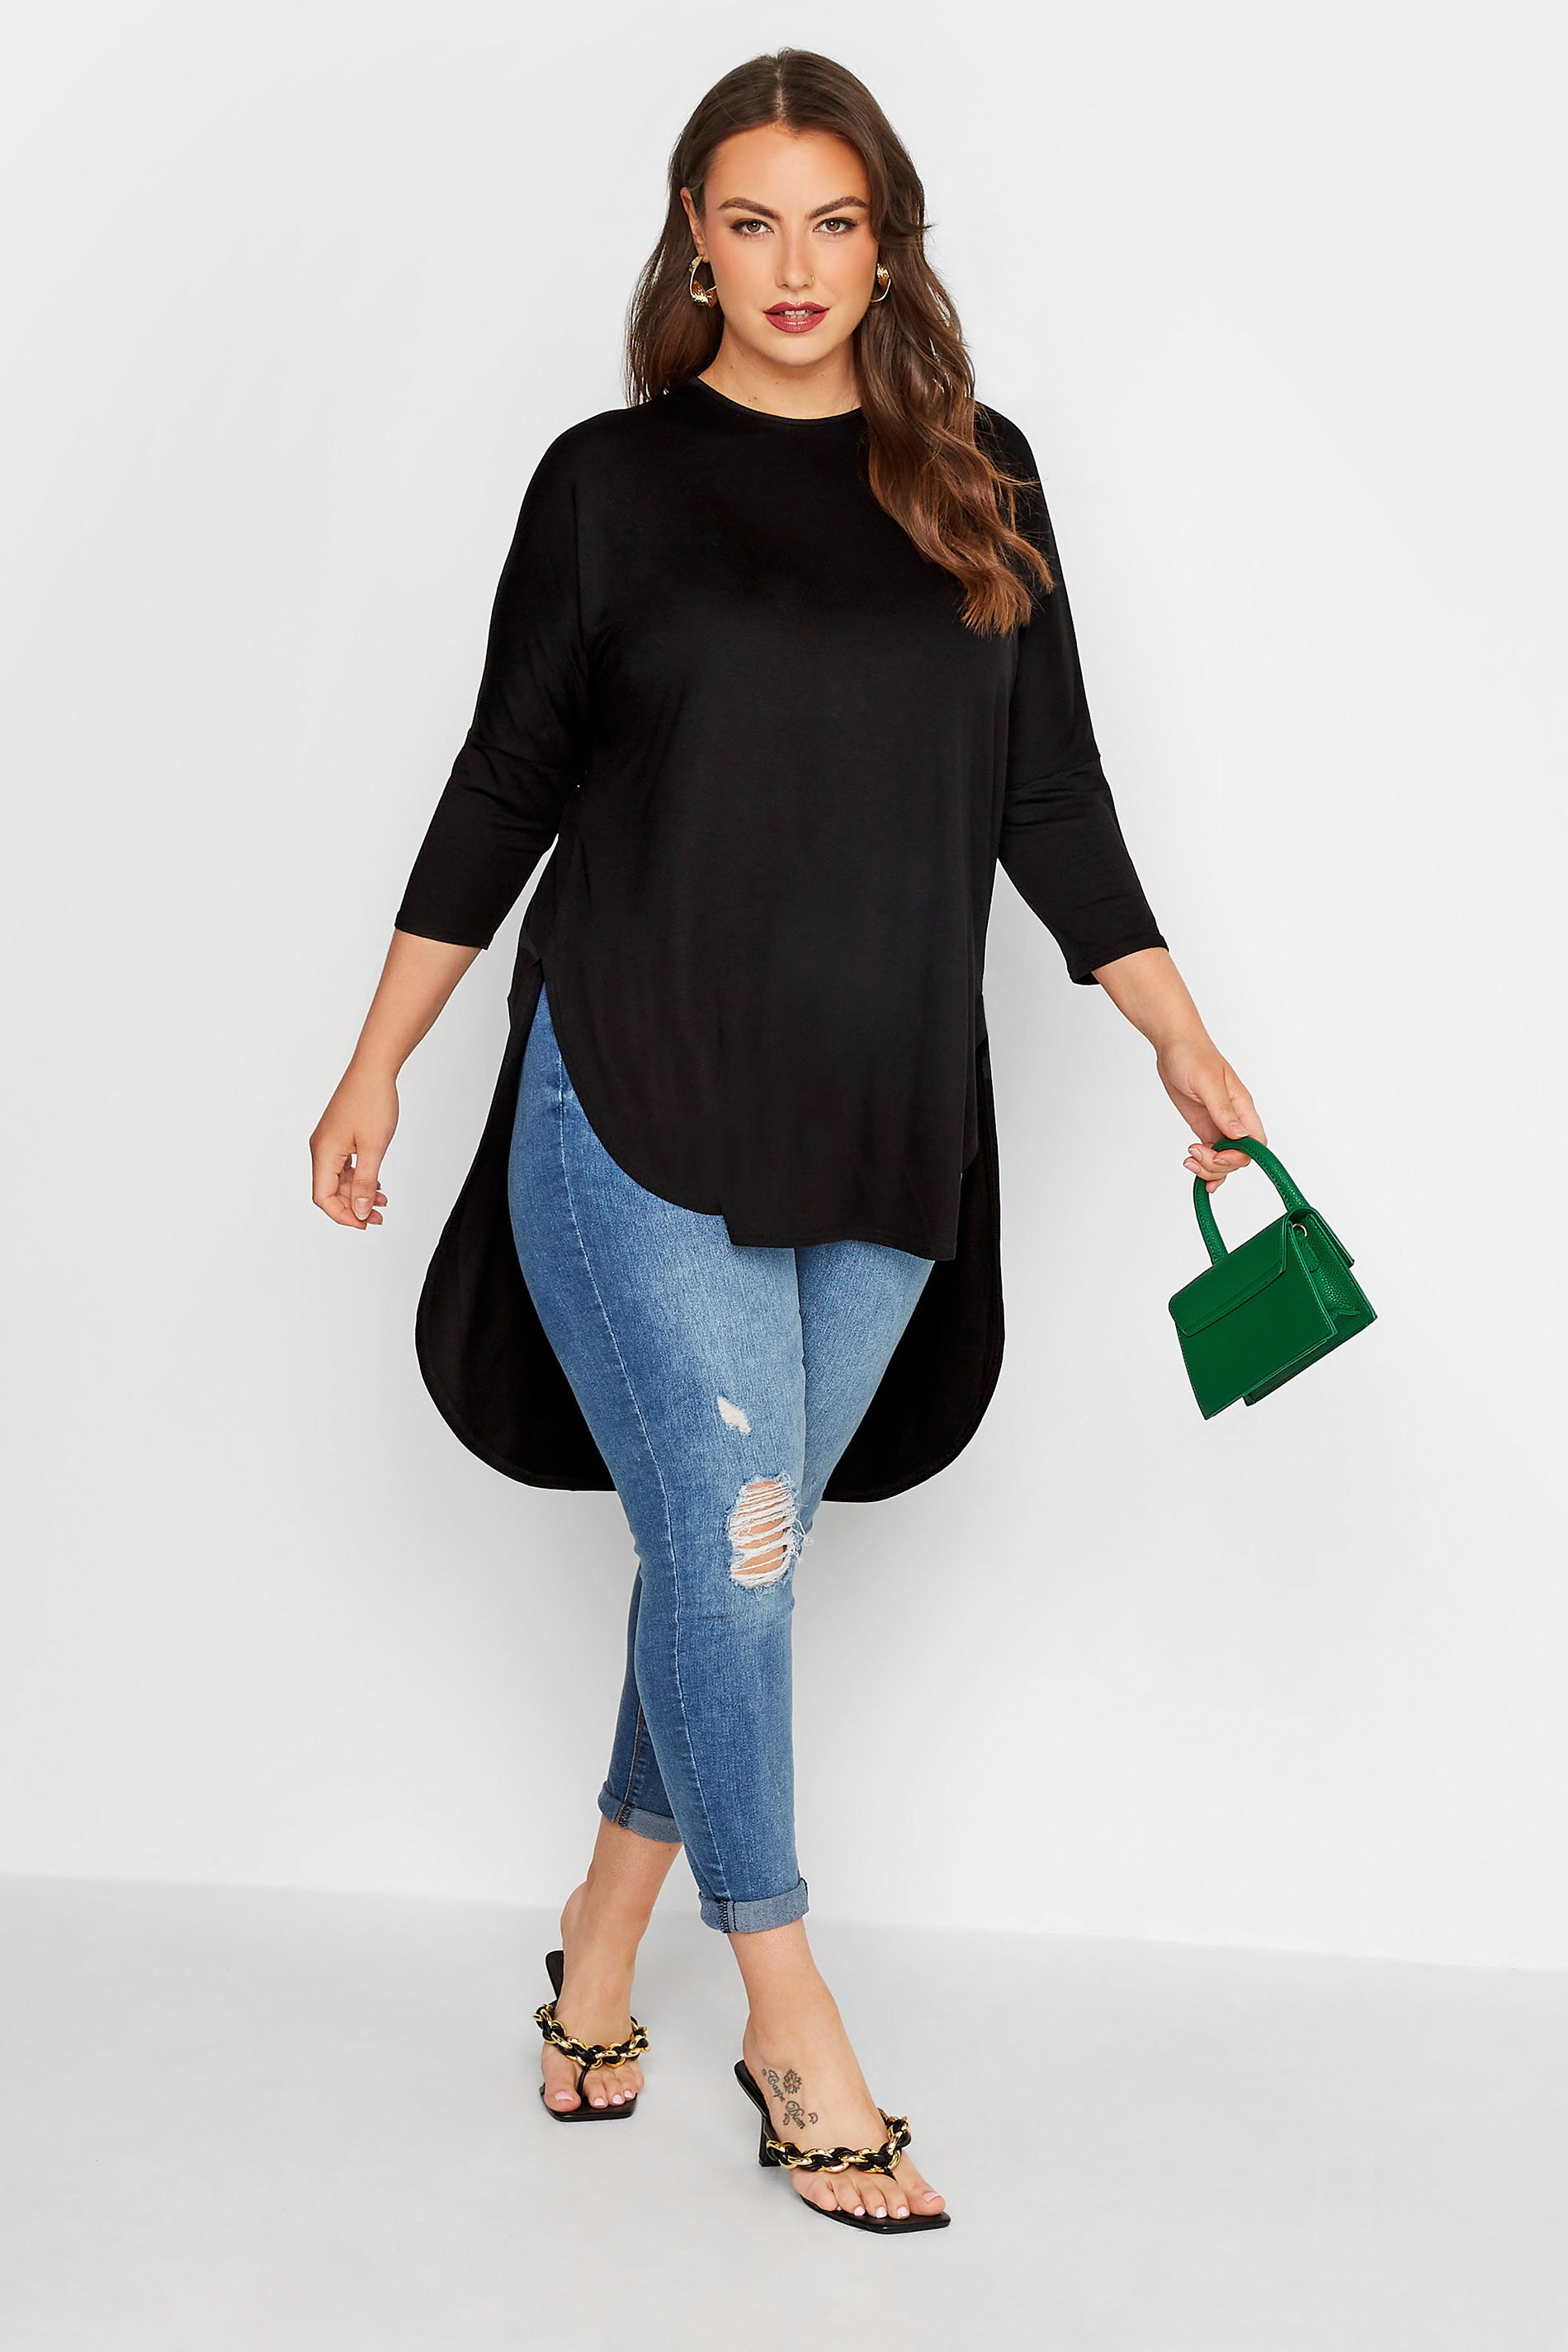 Grande taille  Tops Grande taille  Tops Ourlet Plongeant | LIMITED COLLECTION - T-Shirt Noir Manches Longues Ourlet Plongeant - EF69371